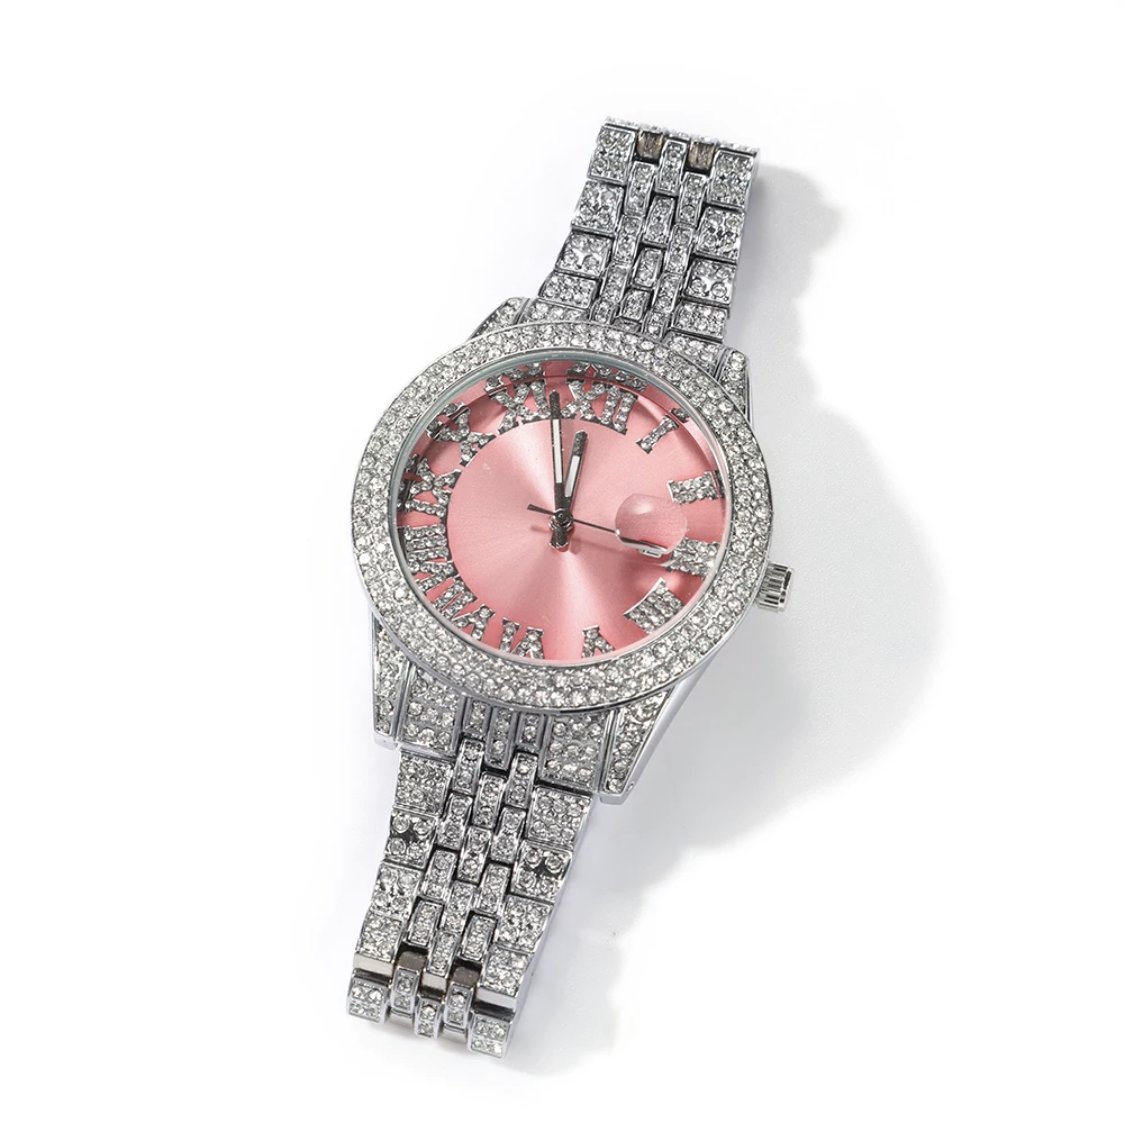 Icy Girl Watch - Pink/Silver - Bedazzle Baddie